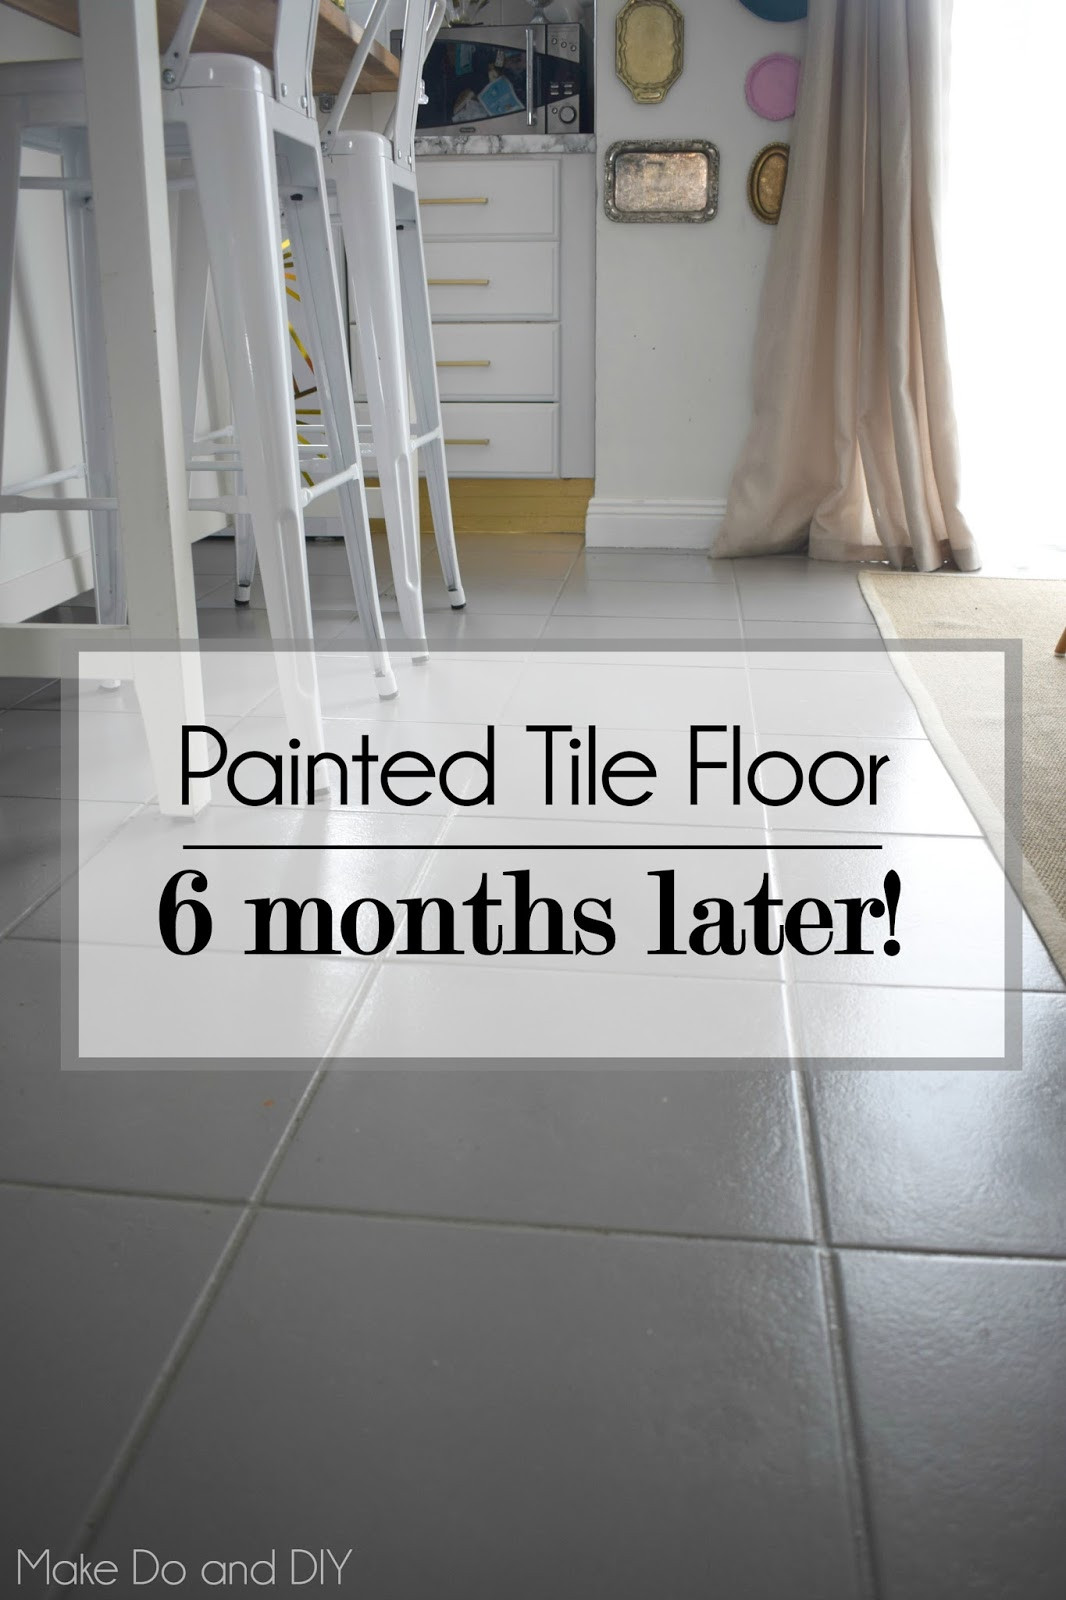 Painting Kitchen Tile Floor
 painted tile floor six months later Make Do and DIY